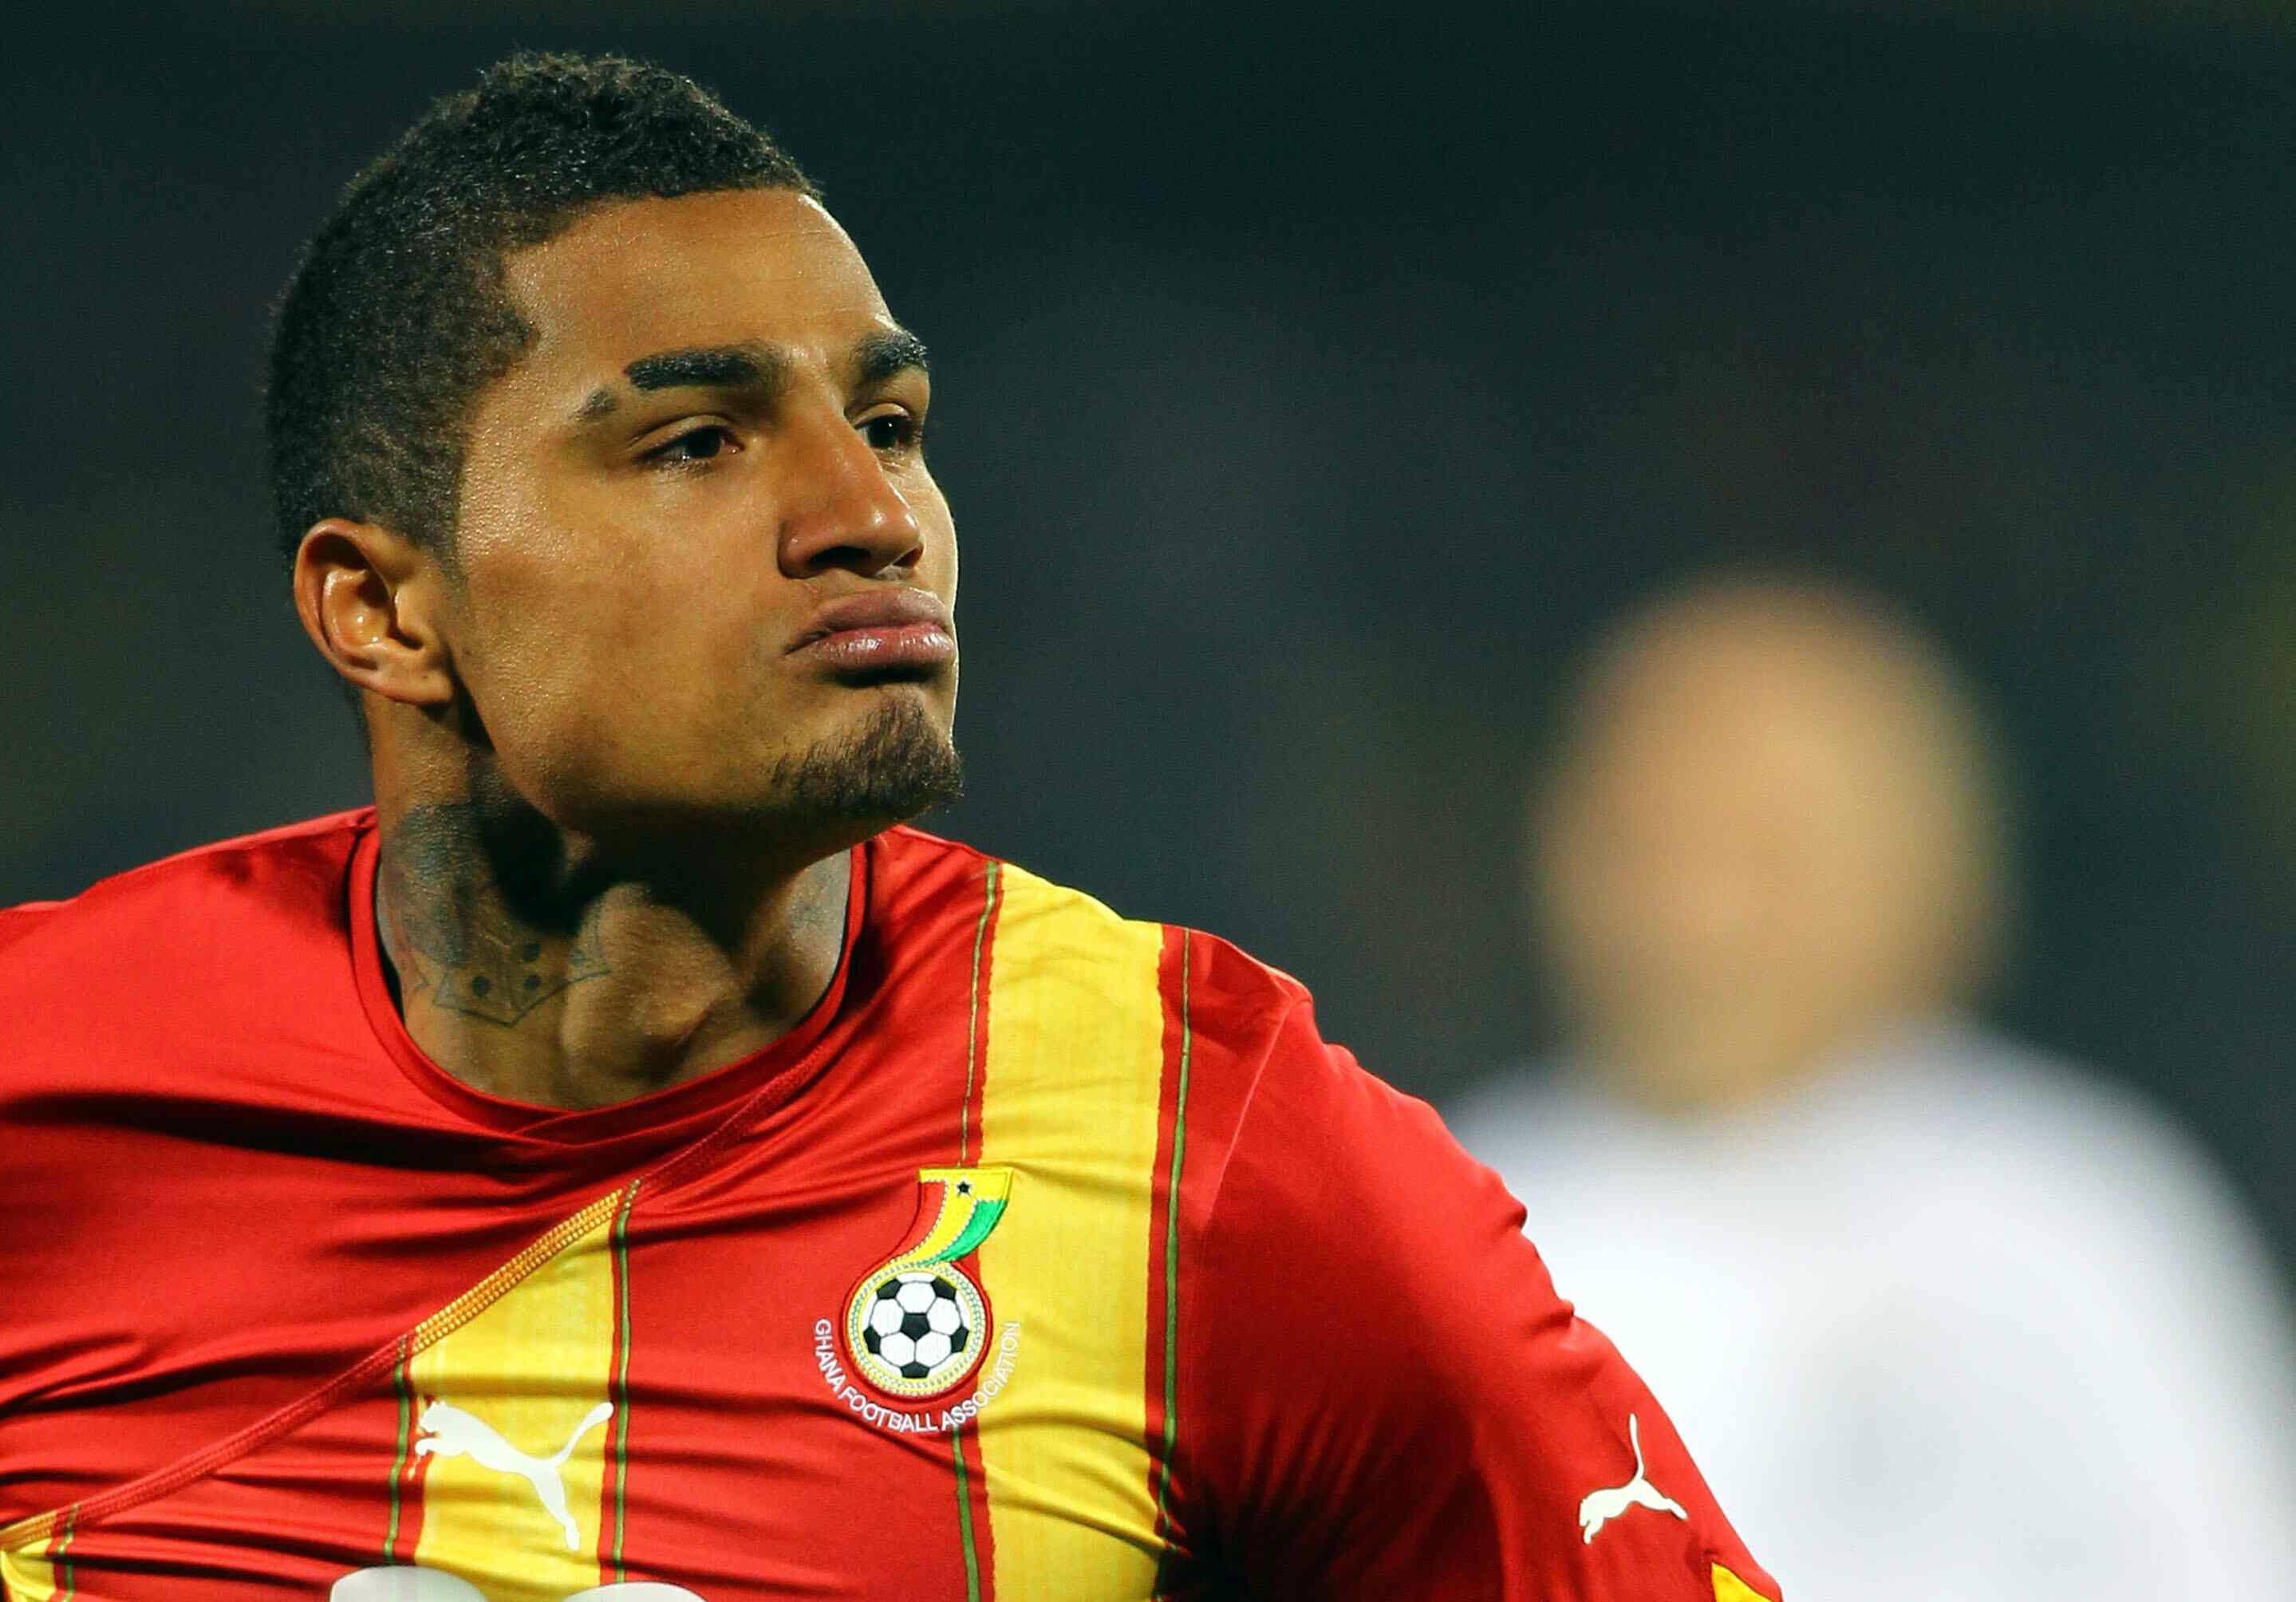 Anas exposé: KP Boateng reacts